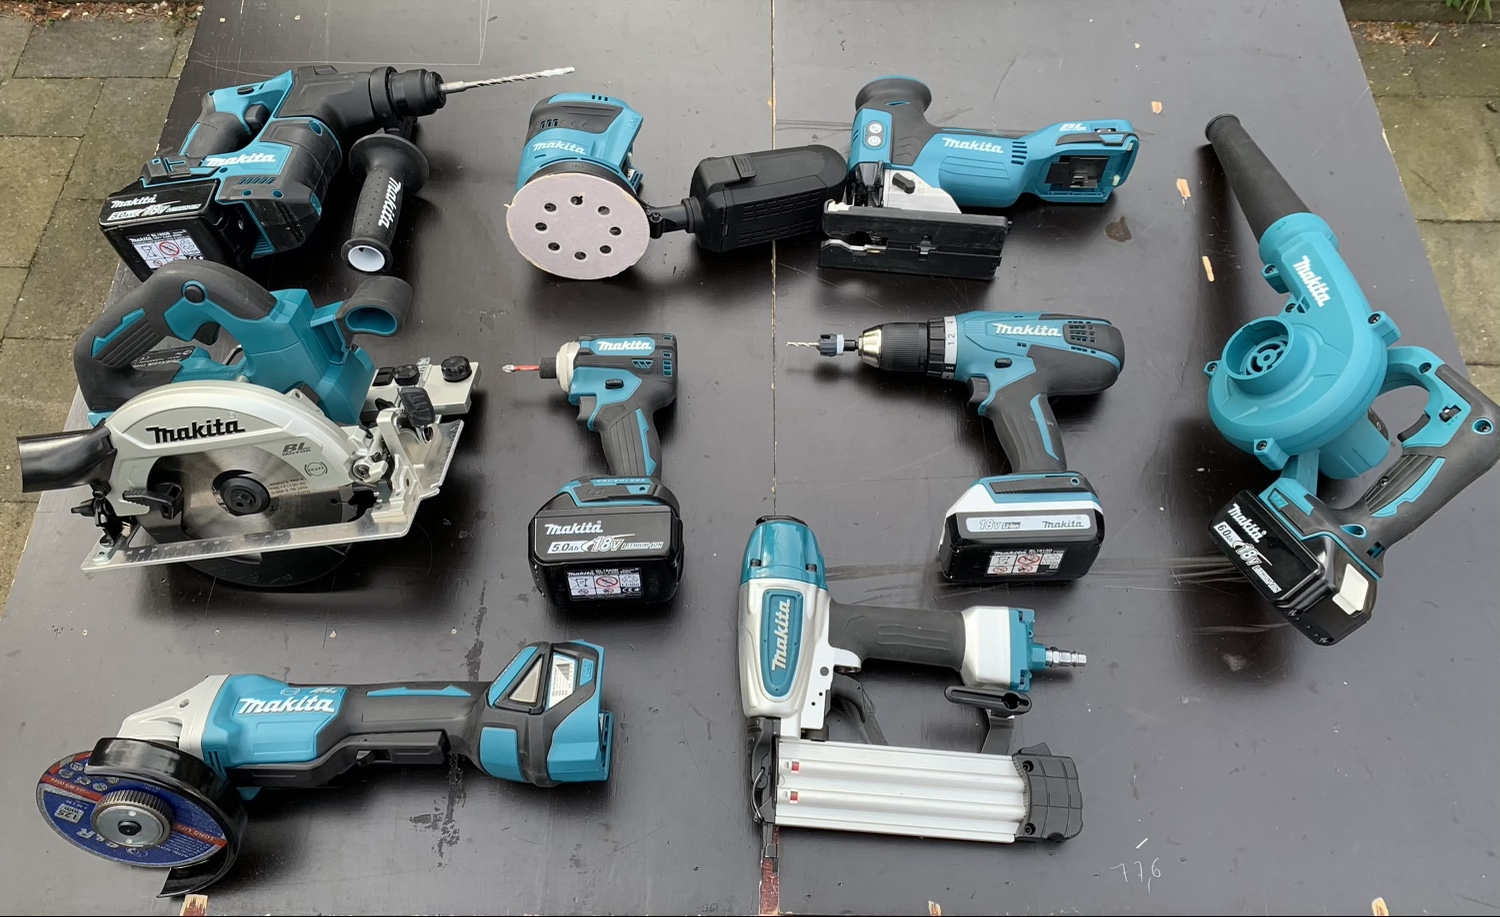 Ok, admittedly I have a proble-, uh, weakness for Makita